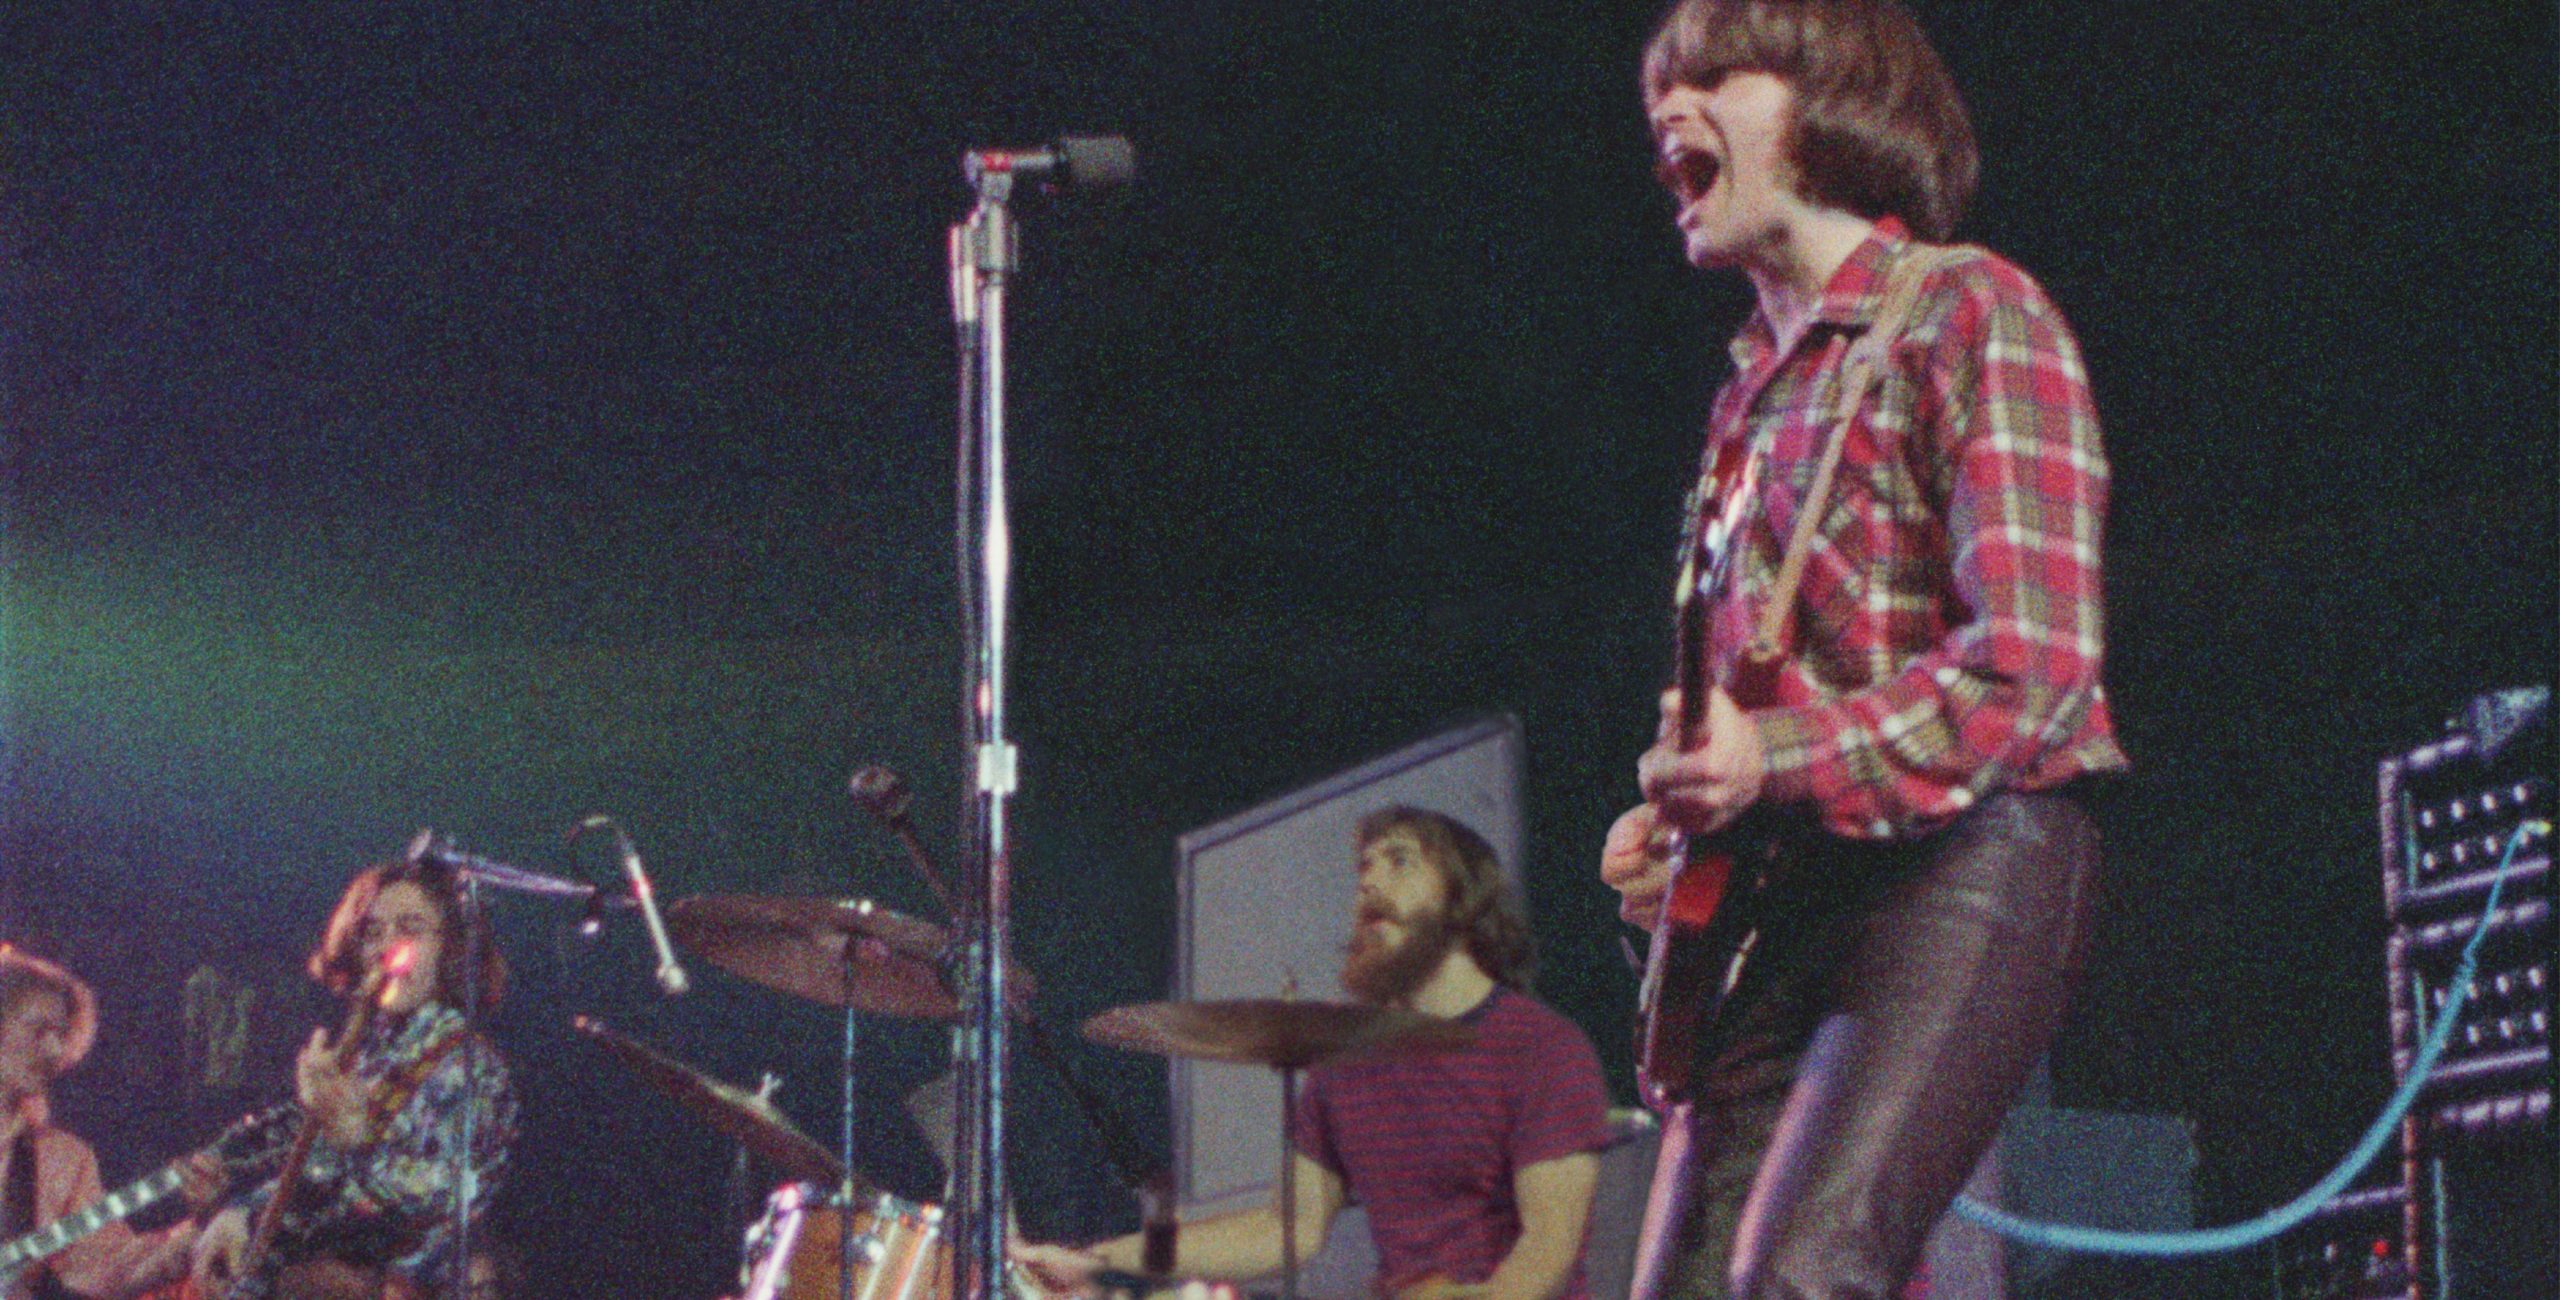 Creedence Clearwater Revival Performs "Proud Mary" At Royal Albert Hall In  Newly-Unearthed Footage [Video]